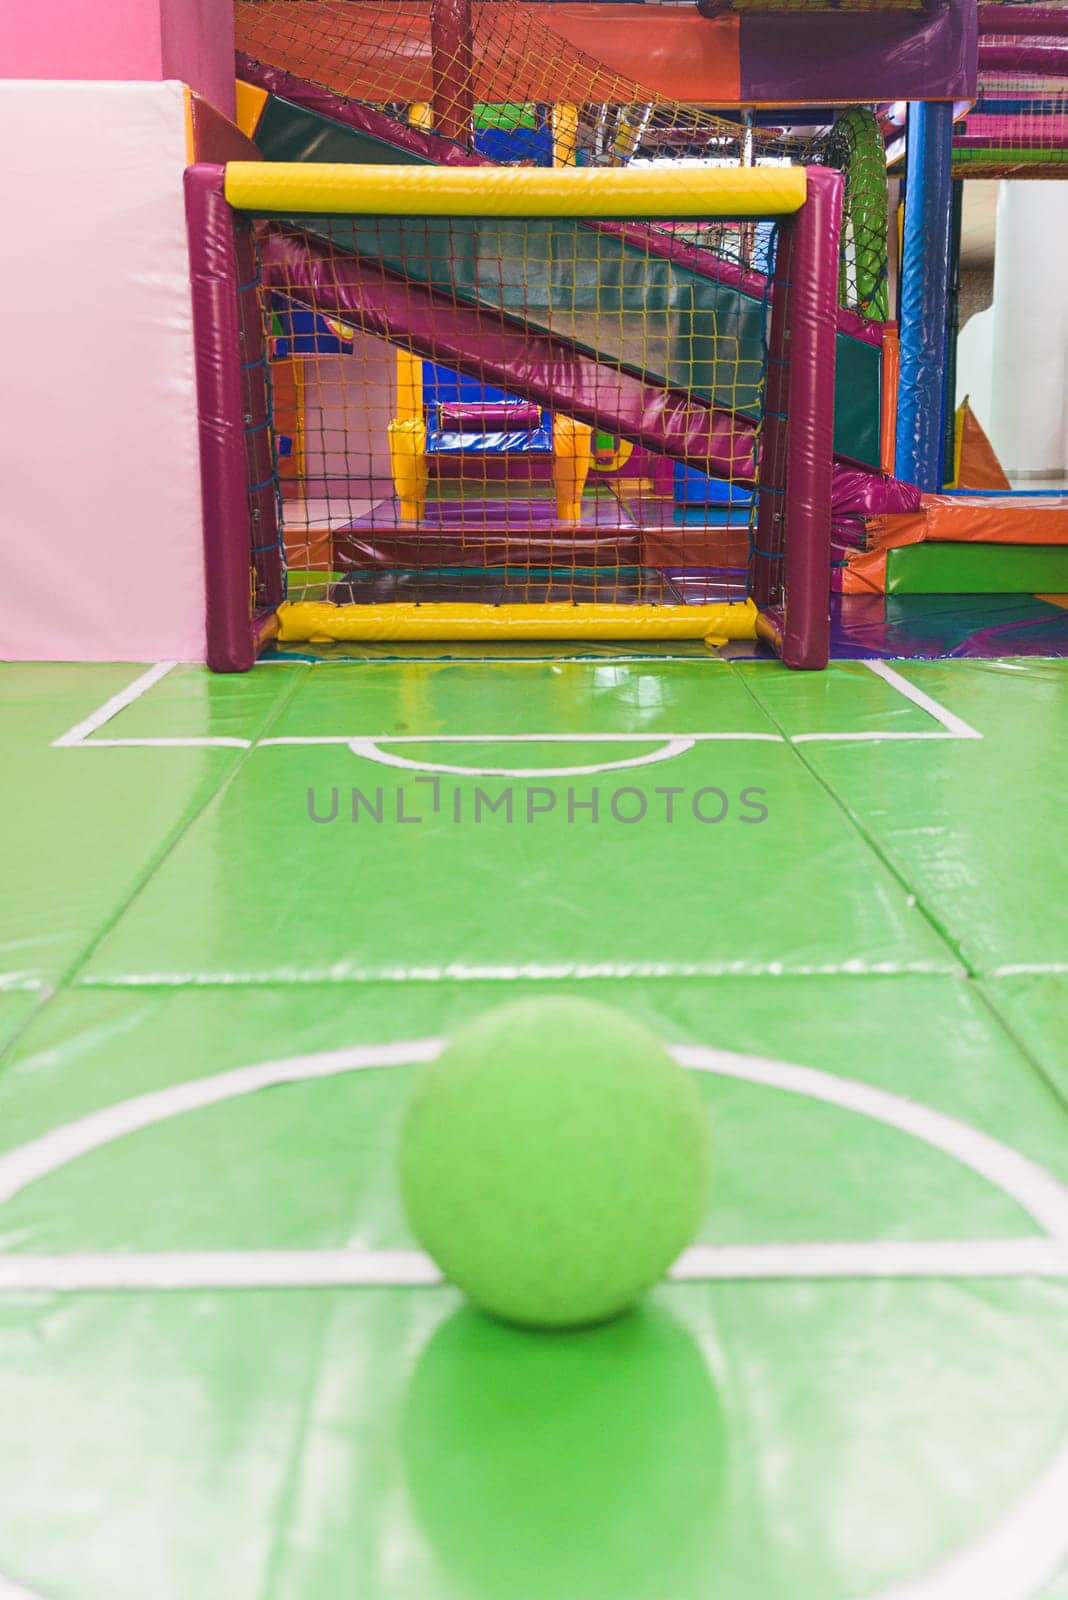 Indoor children's playground in the amusement park with colored balls to play / Inside the beautiful children's playground colored plastic ball of the game room by jcdiazhidalgo